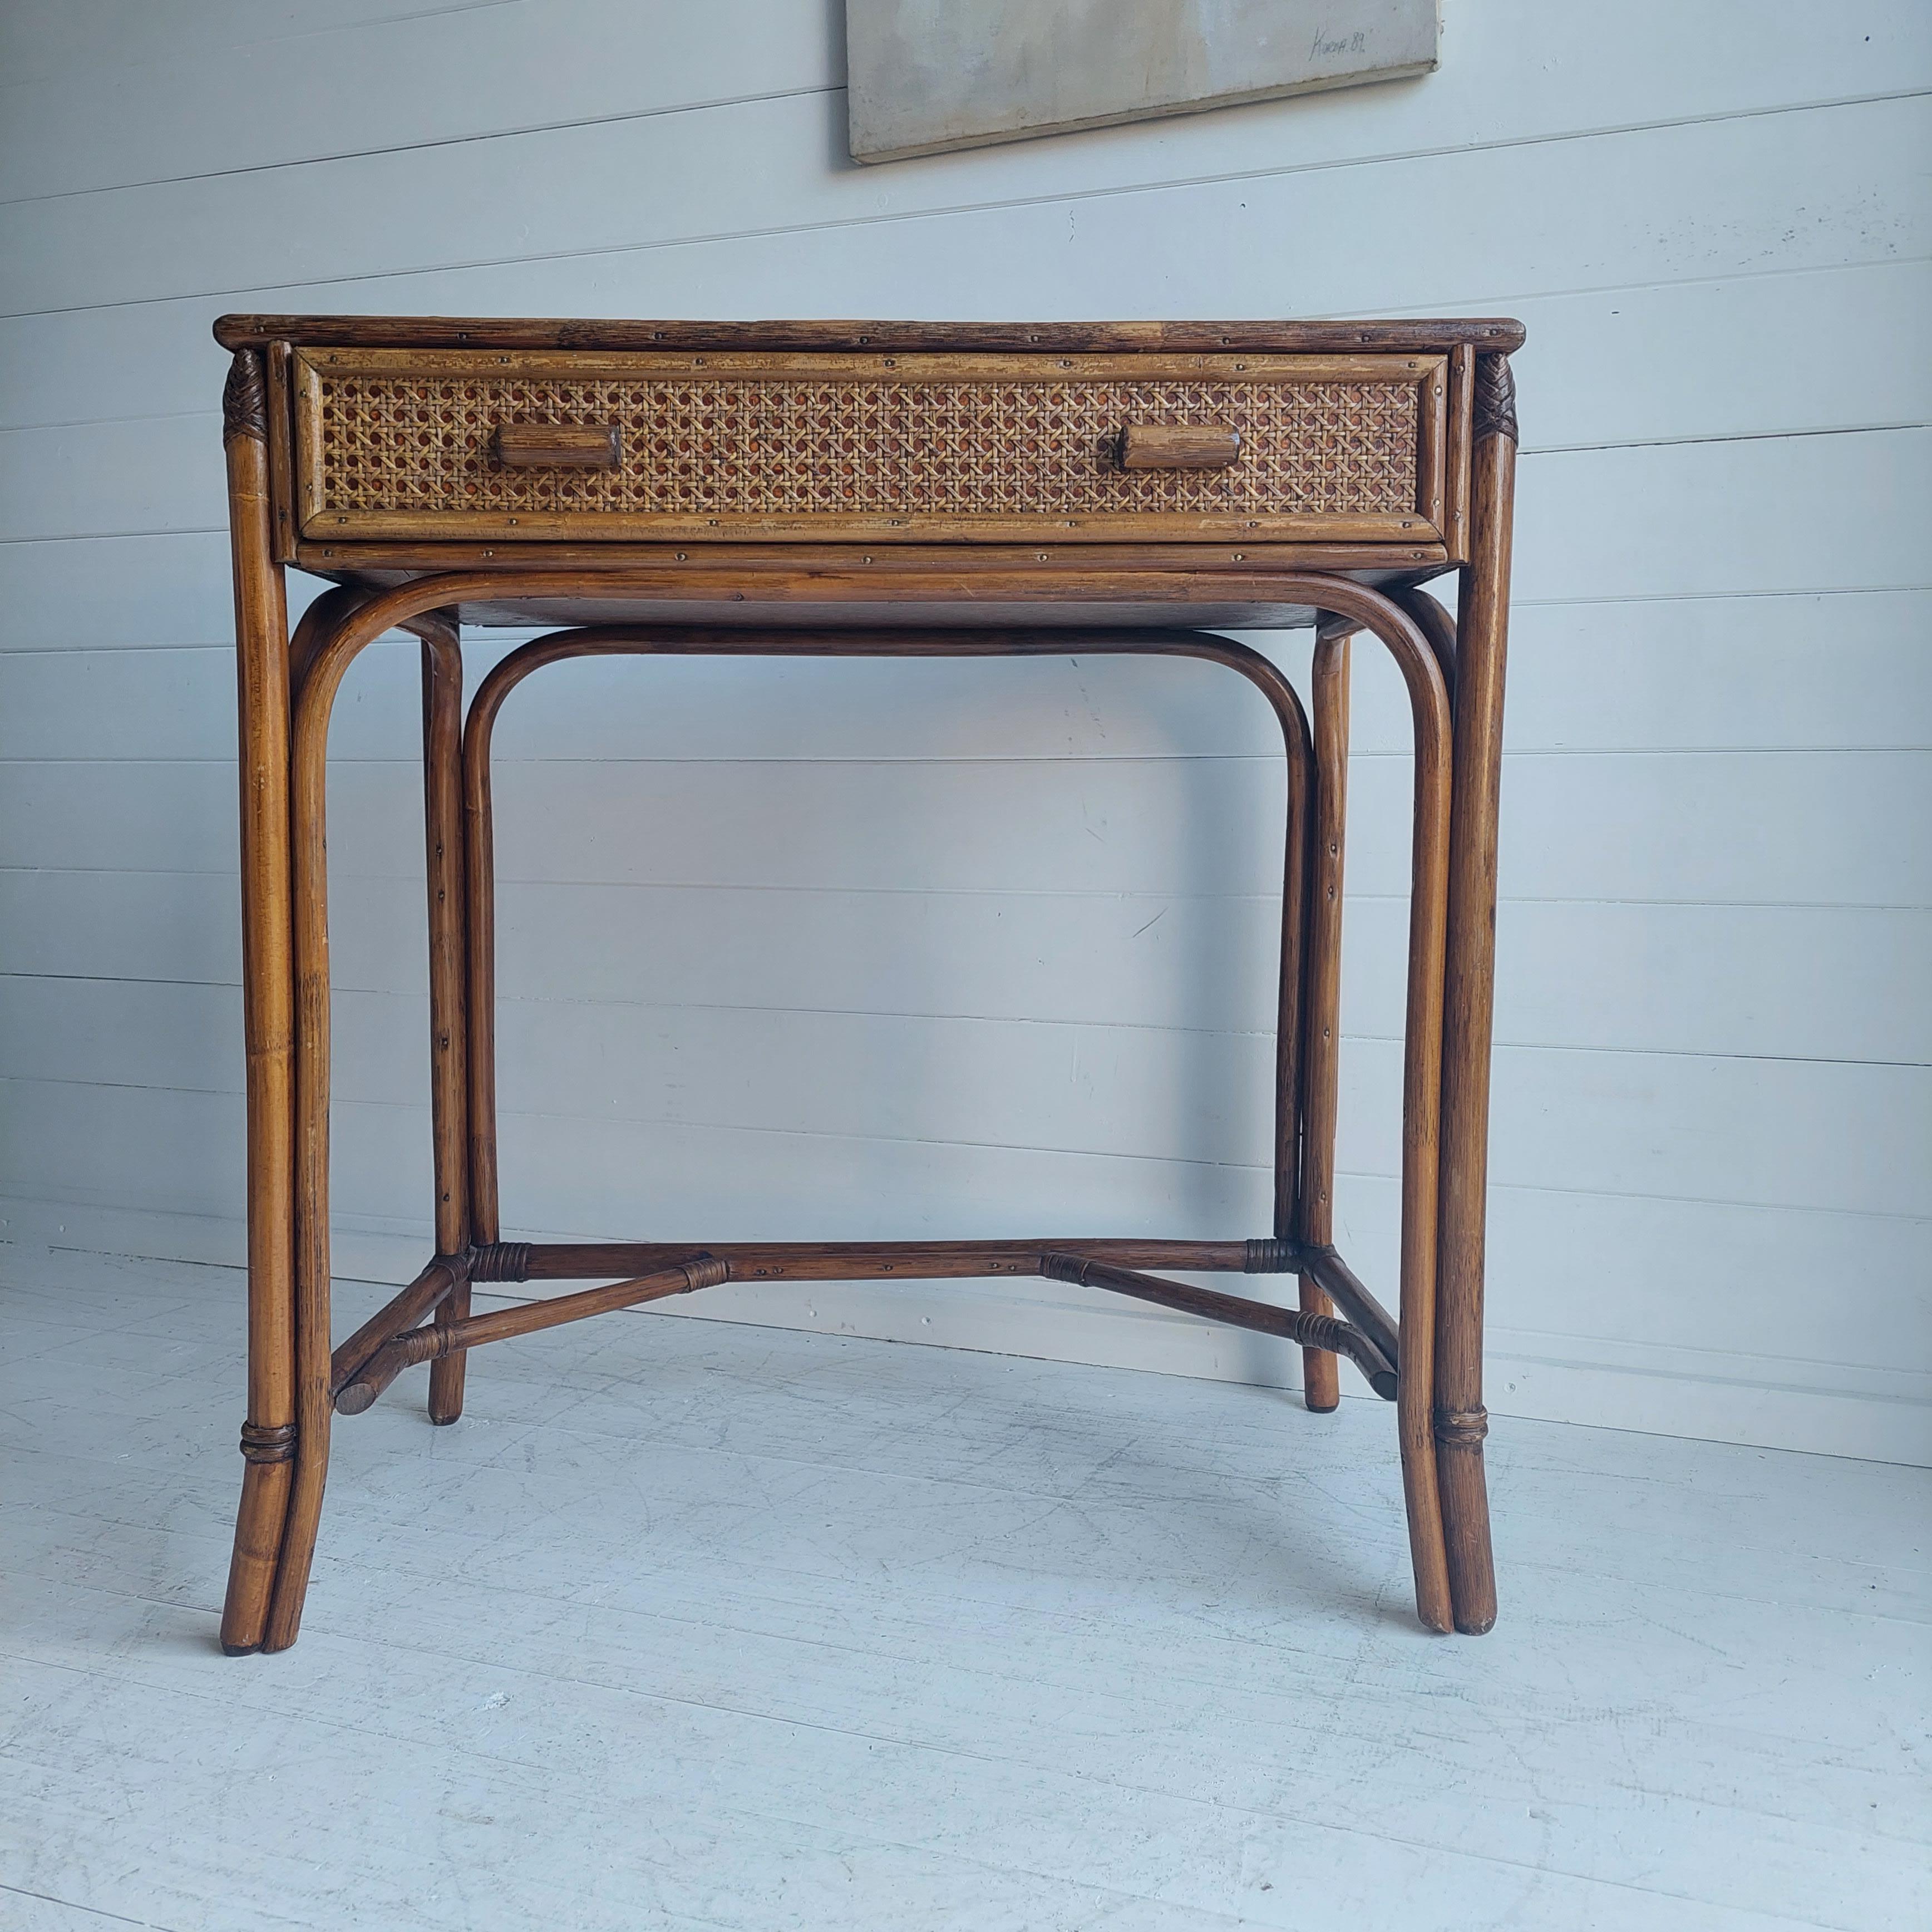 Vintage Angraves Bamboo Rattan Dressing Table 
Beautiful vintage dressing table by the renowned Angraves of Leicester
It could also be used as a desk or make a lovely console table.

Rattan Cane bamboo glass topped dresser/vanity circa 1970s. 

An